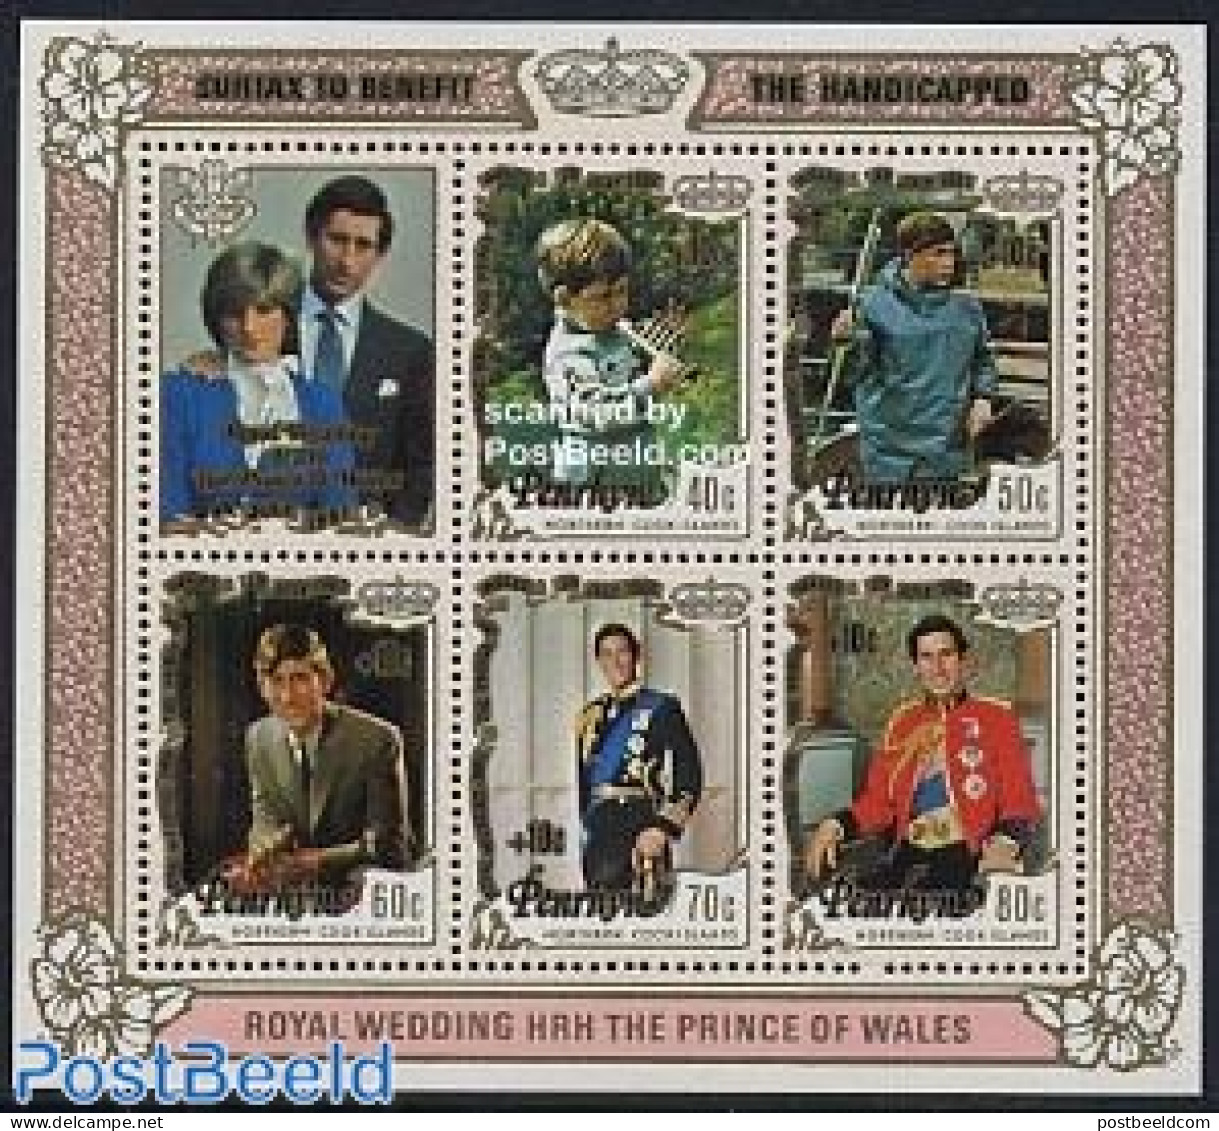 Penrhyn 1981 Int. Year Of Disabled People S/s, Mint NH, Health - History - Int. Year Of Disabled People 1981 - Charles.. - Handicaps